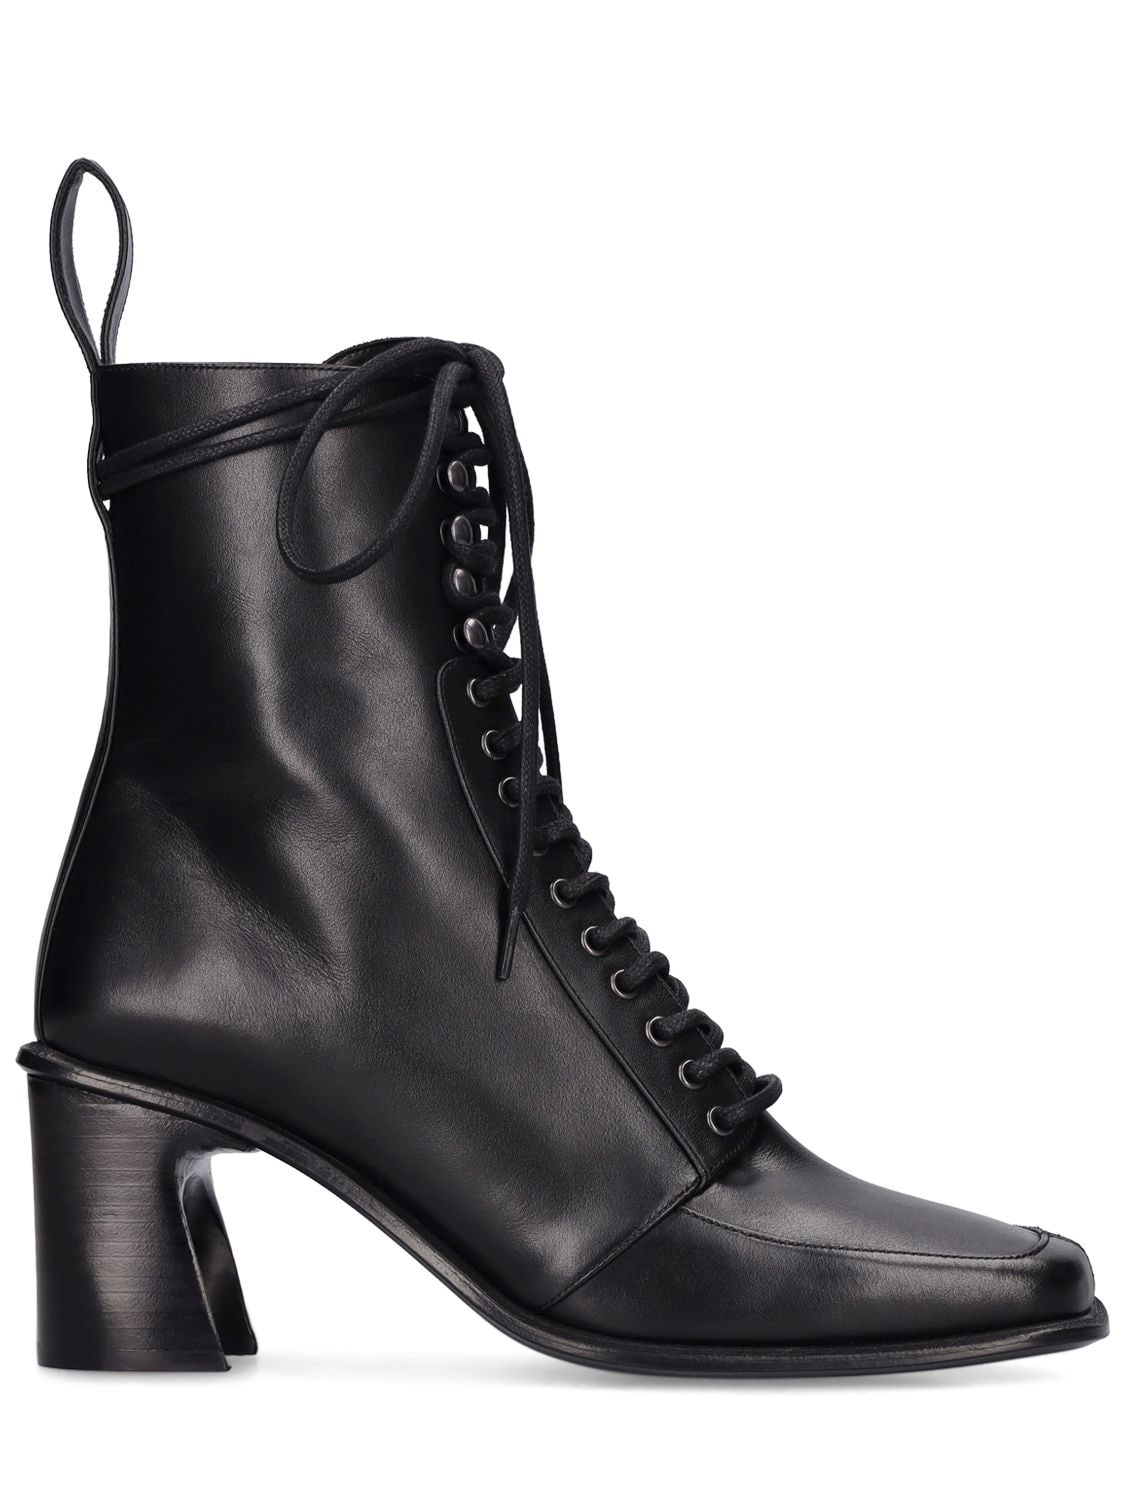 Marine Serre 60mm Leather Ankle Boots In Black